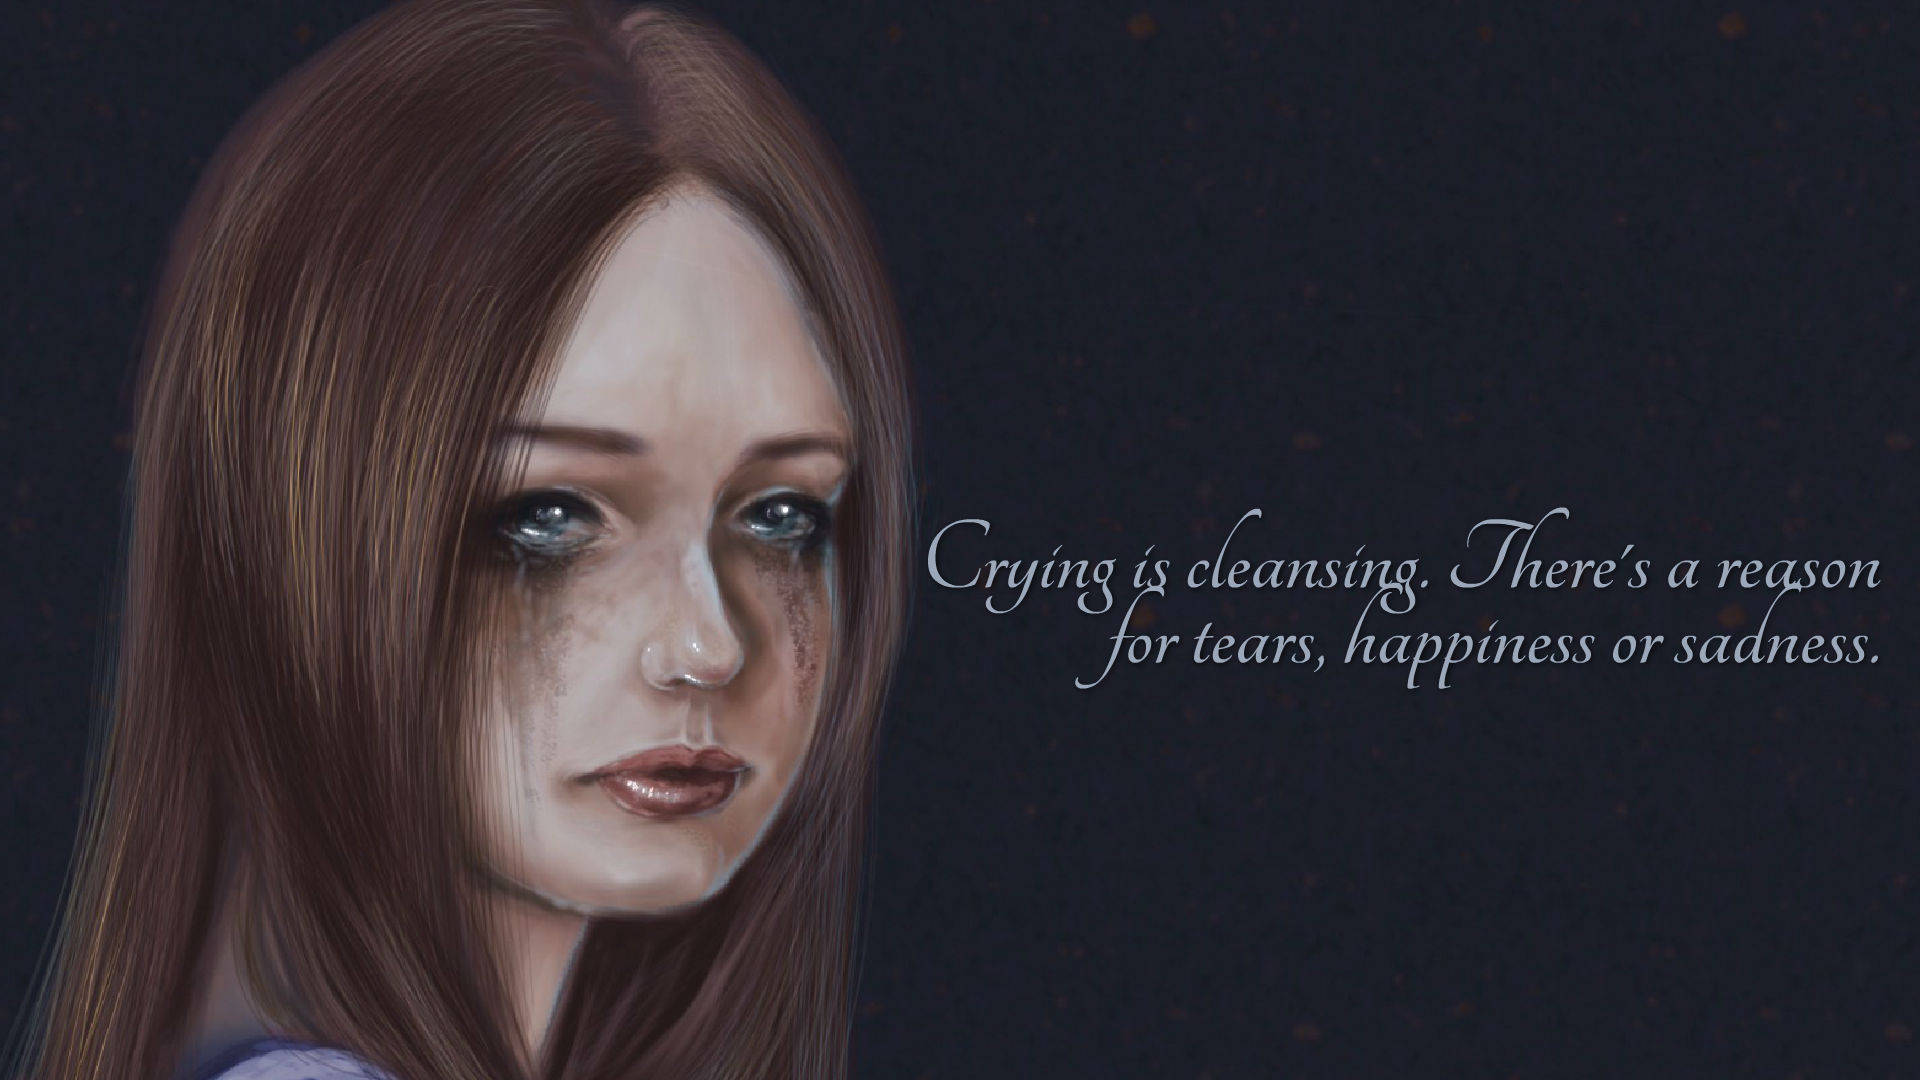 Free Sad Quotes Wallpaper Downloads, [200+] Sad Quotes Wallpapers for FREE  